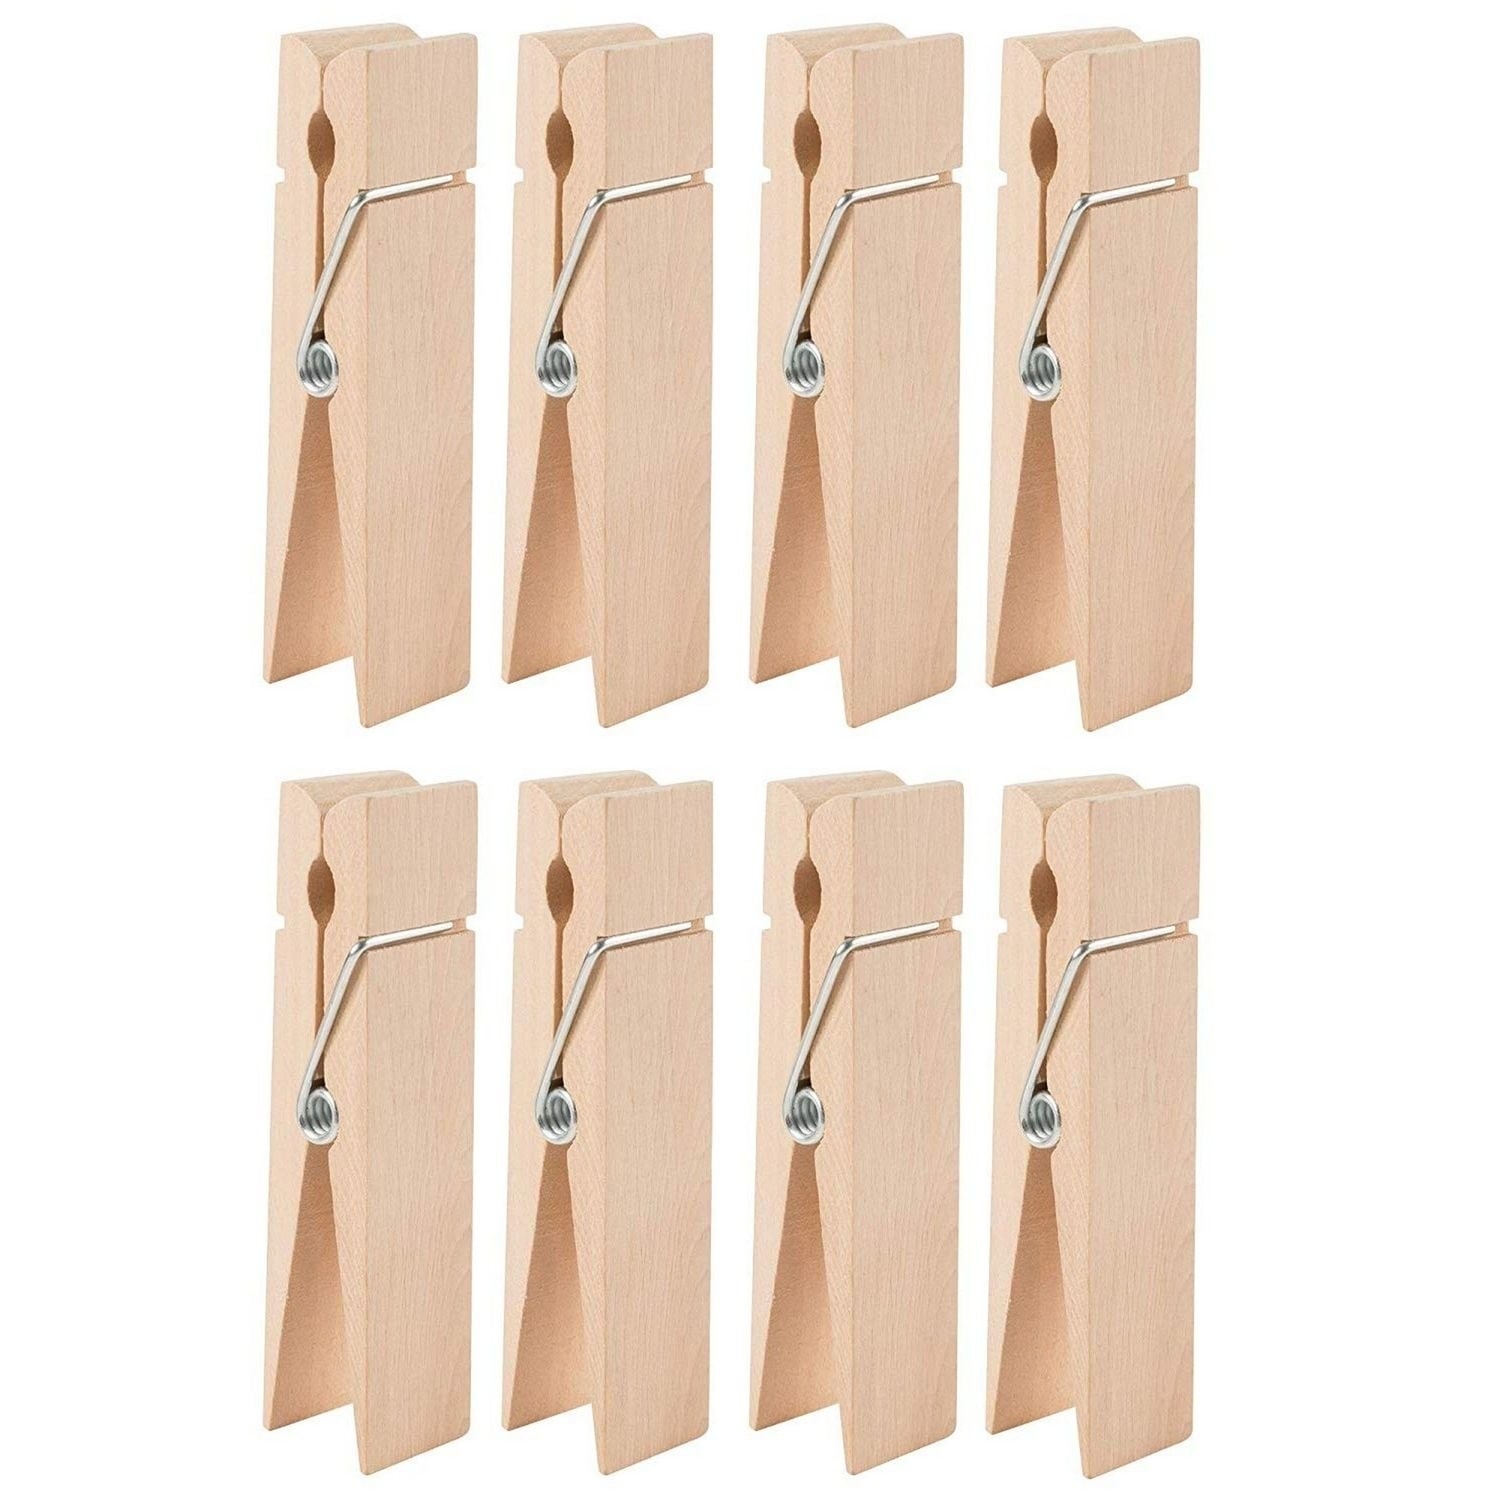 AllTopBargains 40 Pcs Wood Clothespins with Spring 2 7/8 Large Heavy Duty Clothes Pins Crafts